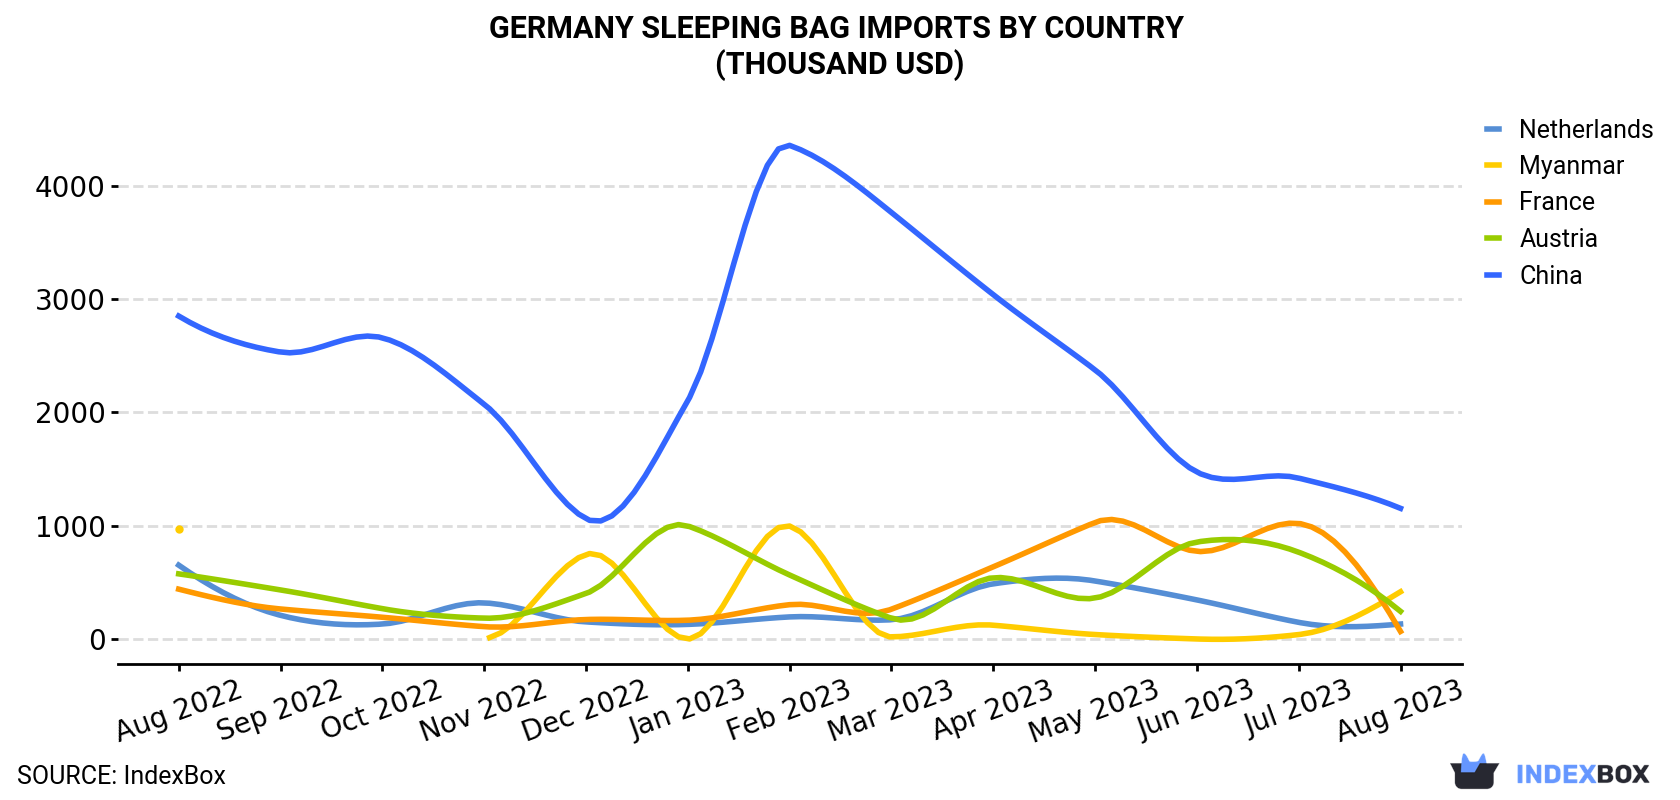 Germany Sleeping Bag Imports By Country (Thousand USD)